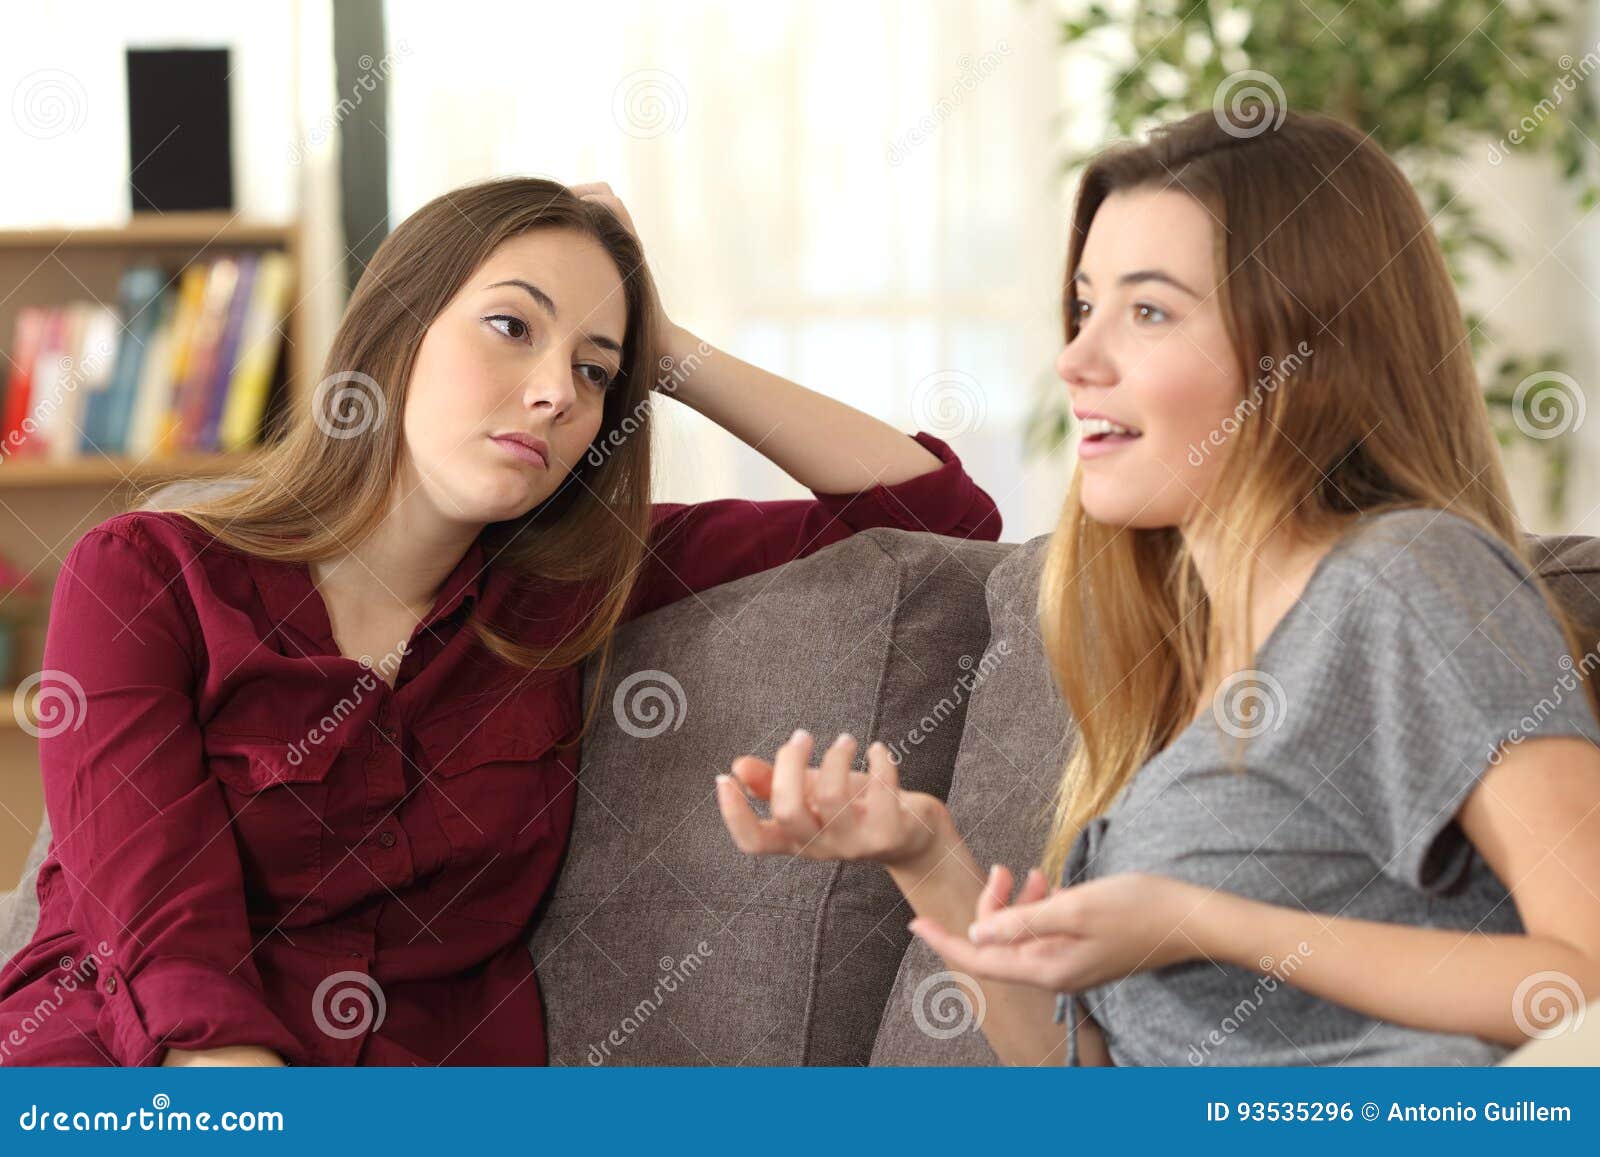 bored girl listening to her friend having a conversation